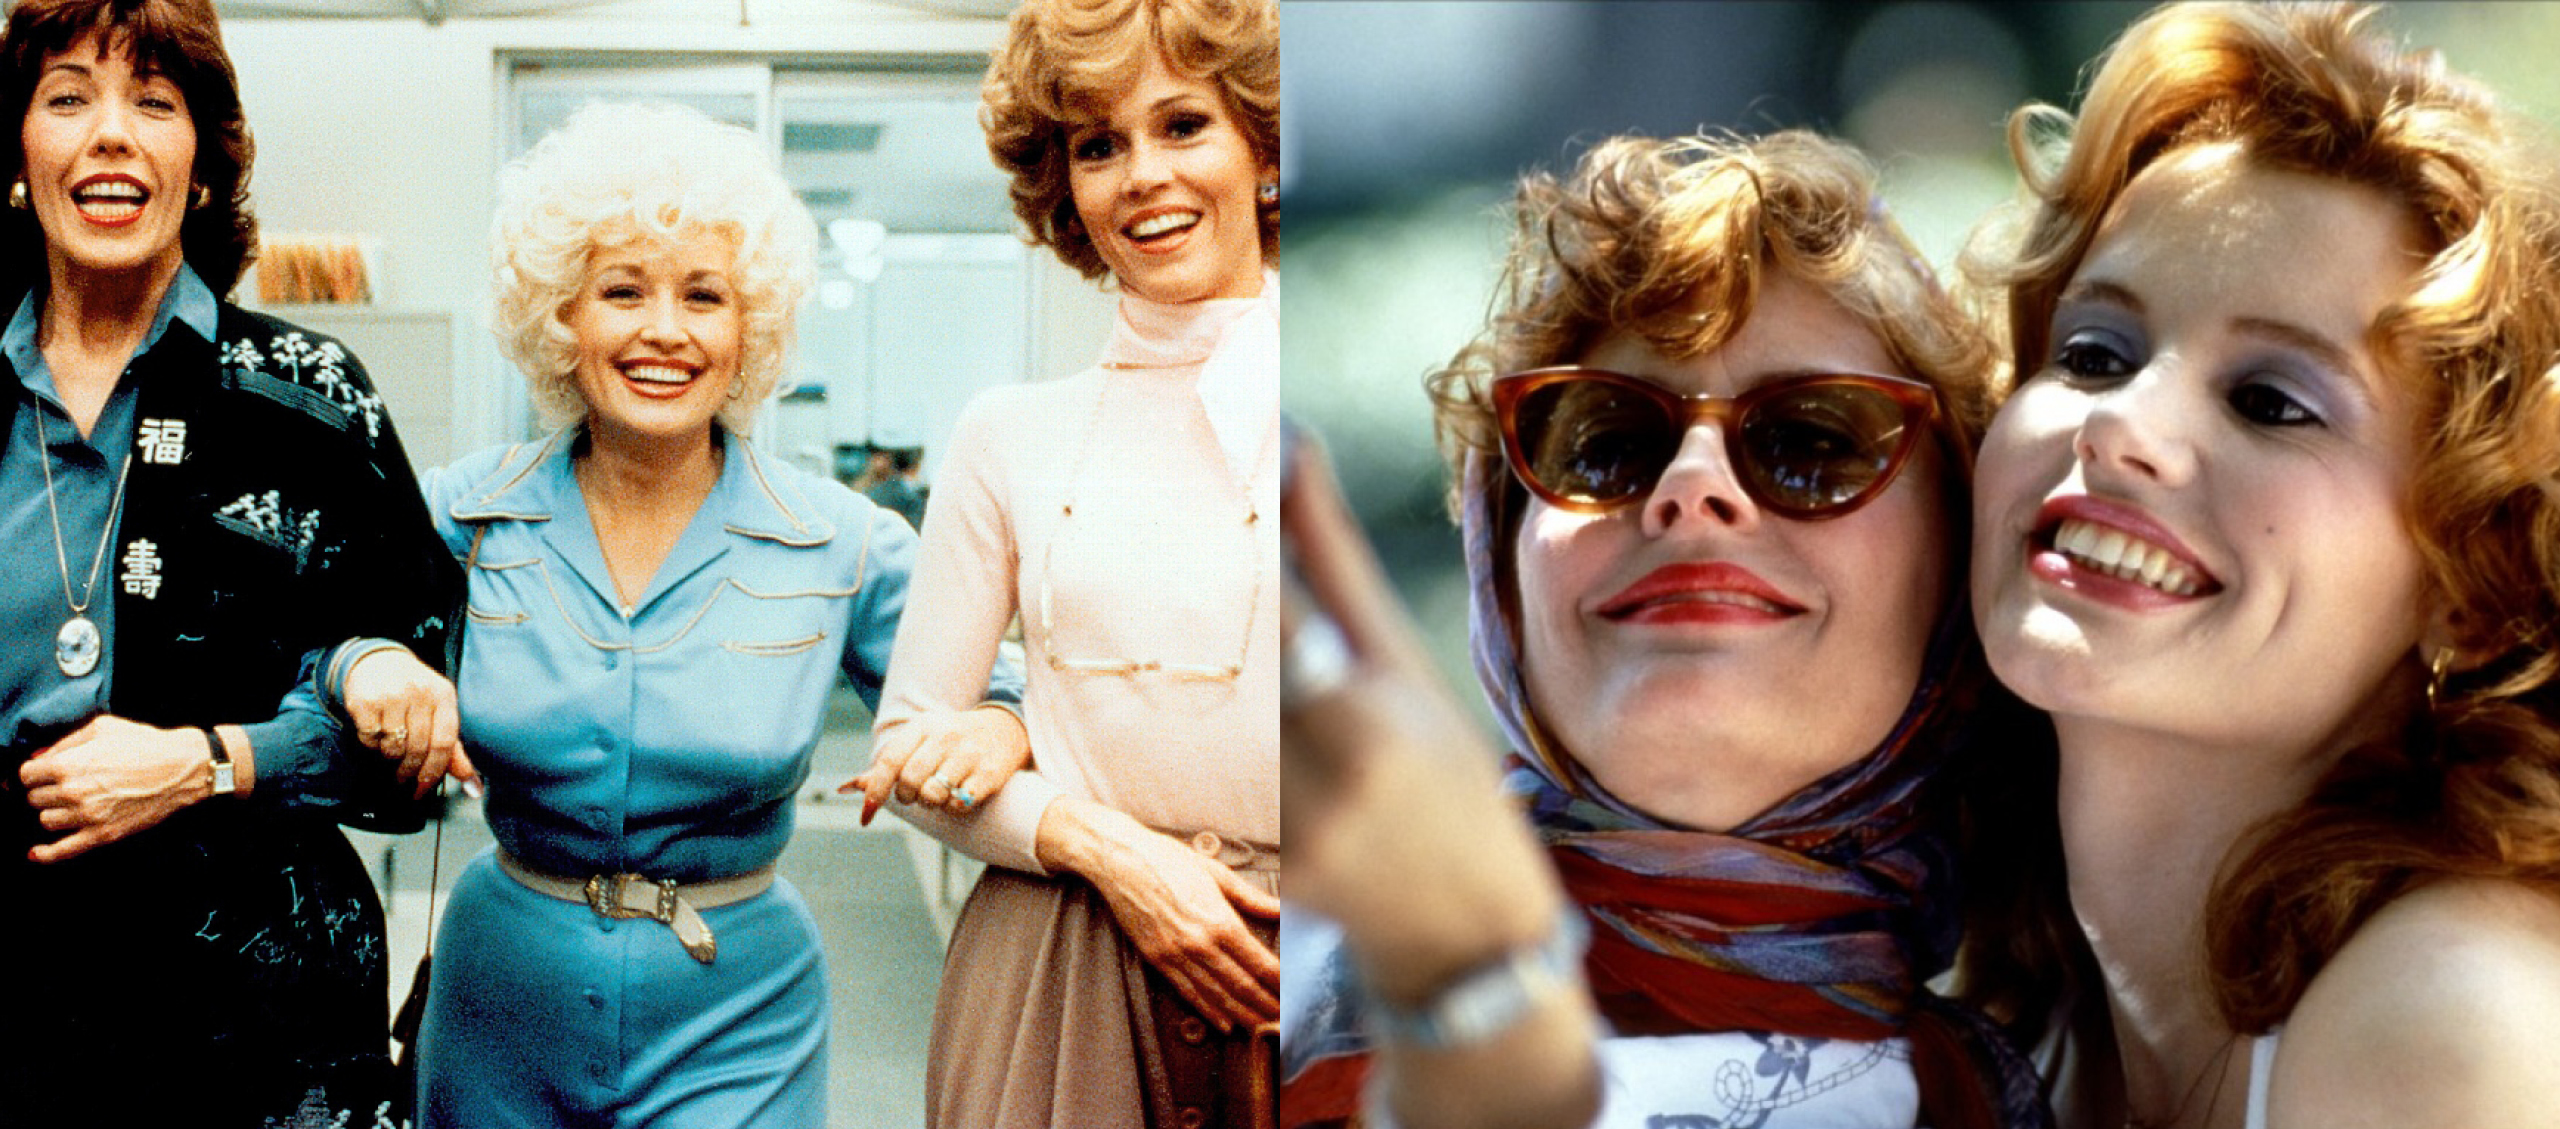 Stills from 9 to 5 with Lily Tomlin, Dolly Parton and Jane Fonda next to a still from Thelma and Louise with Susan Sarandon and Geena Davis.